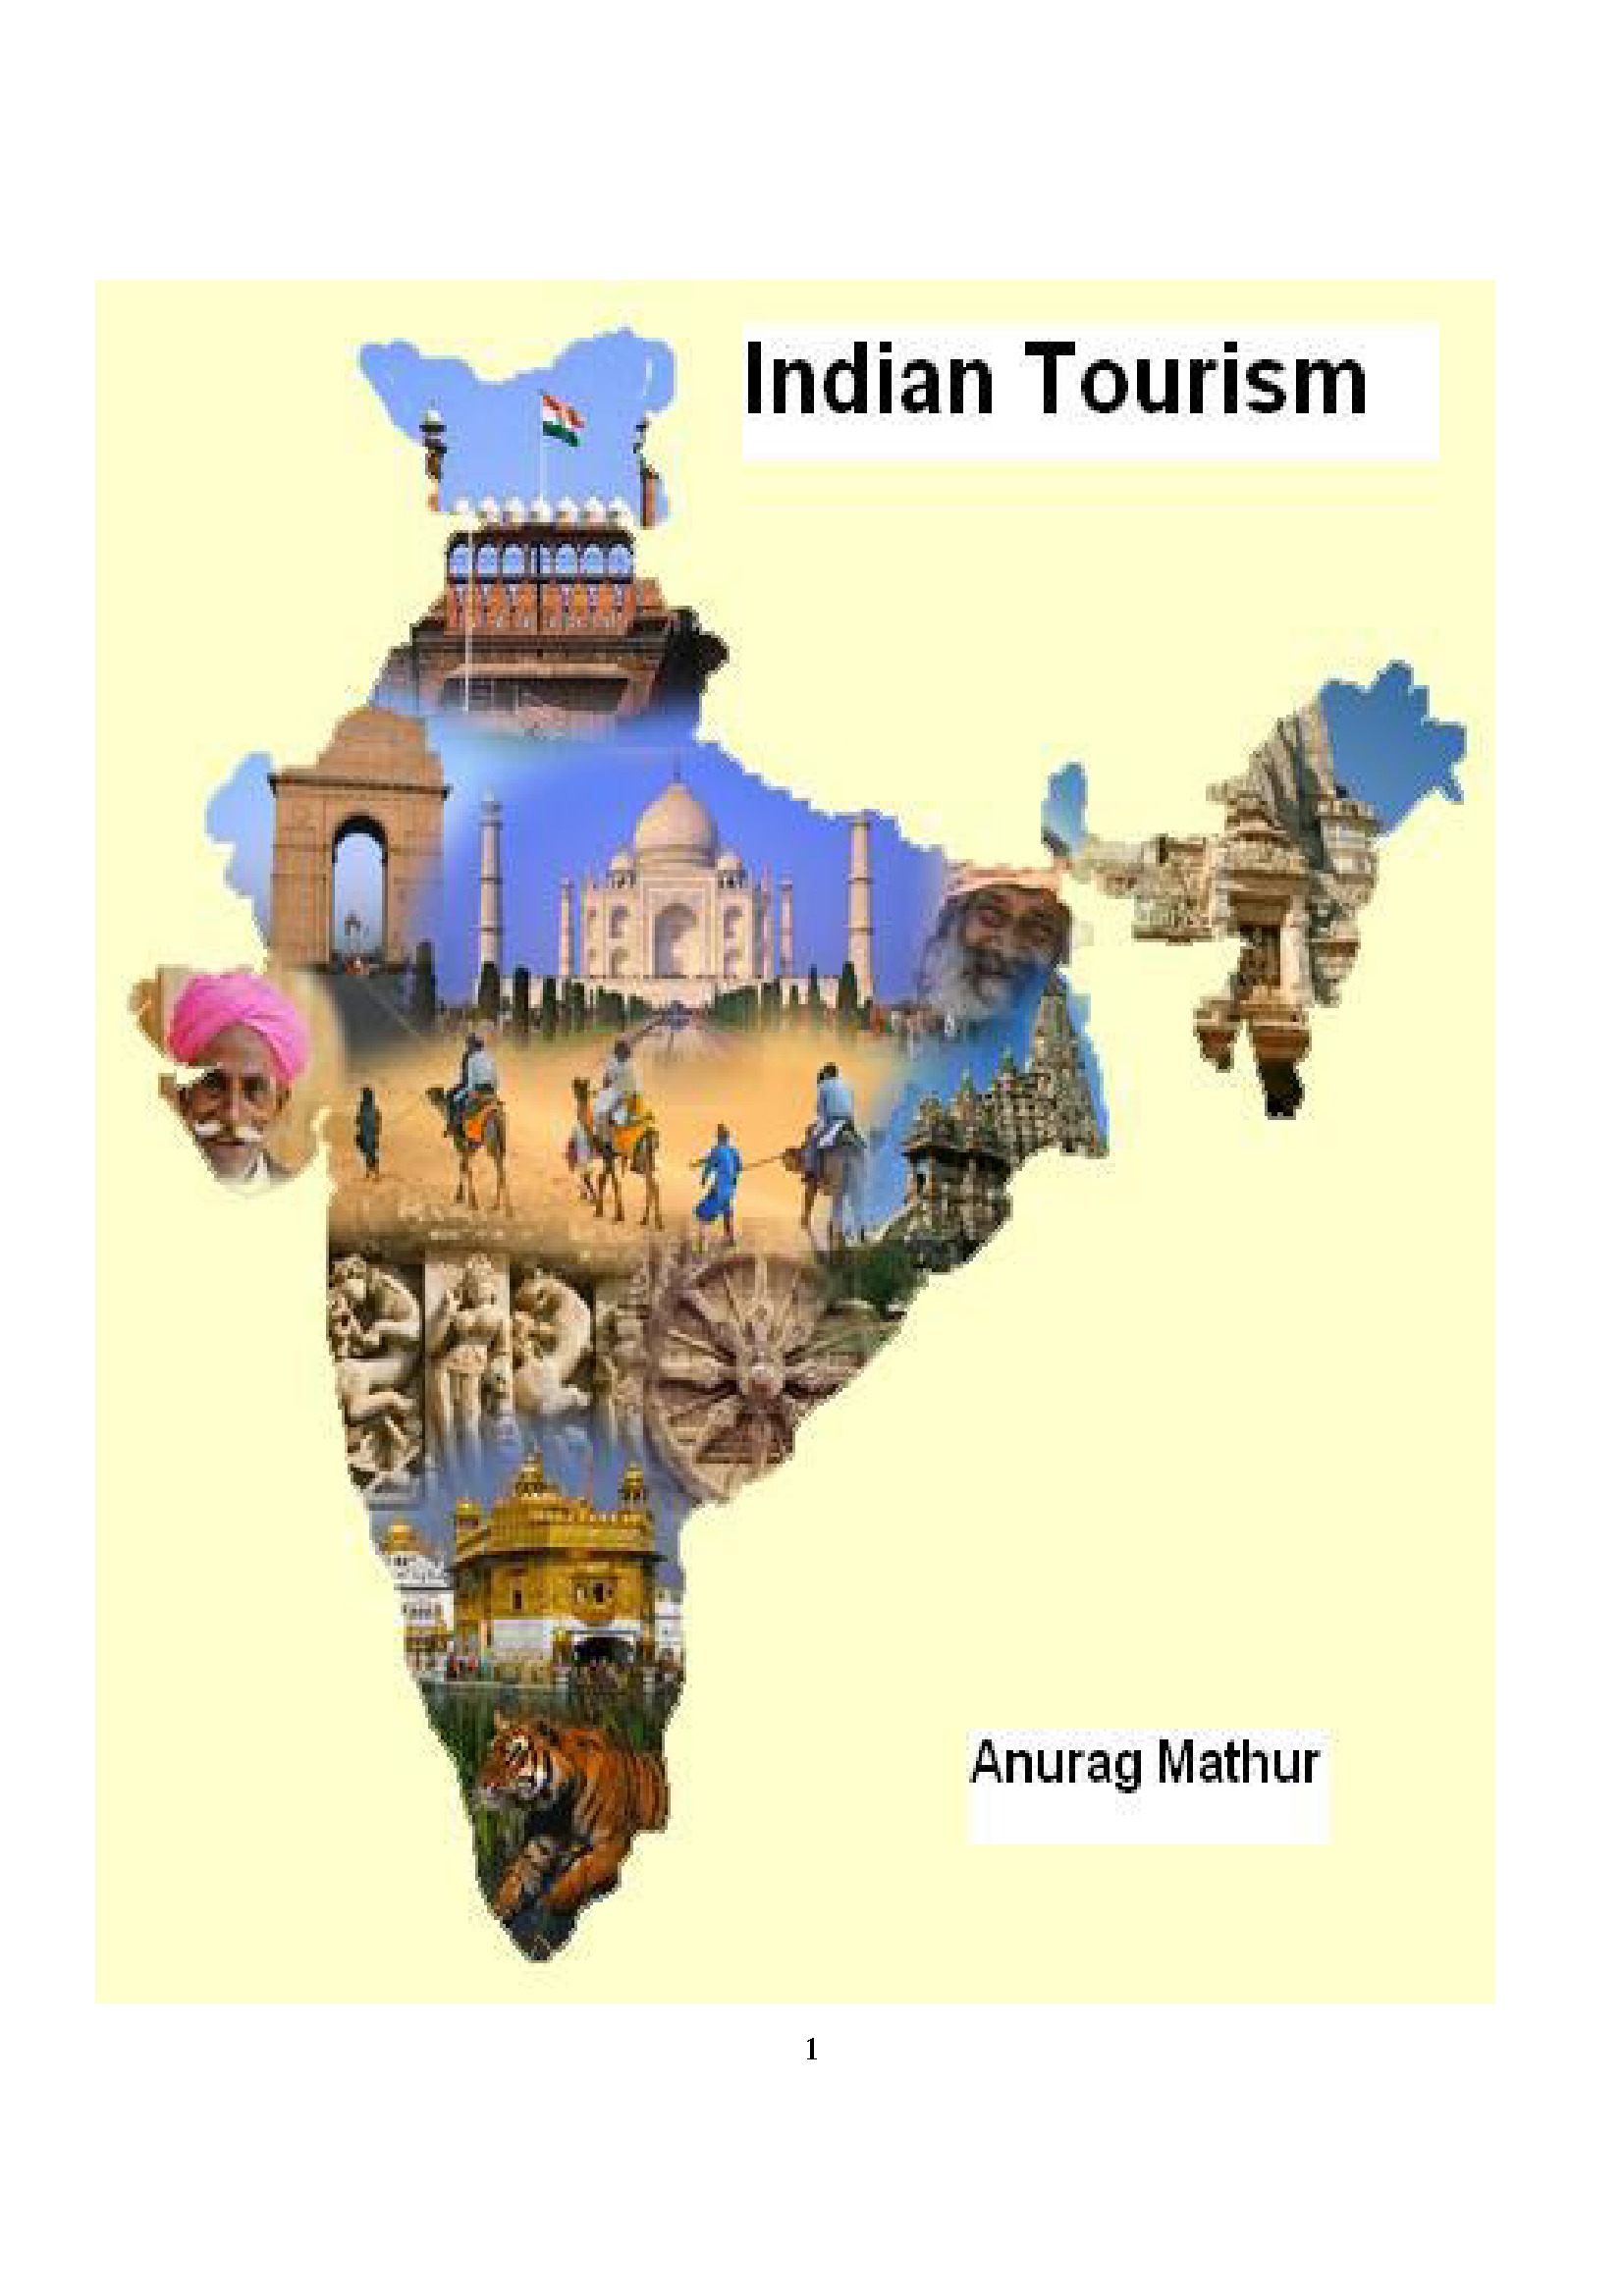 tourism project in india